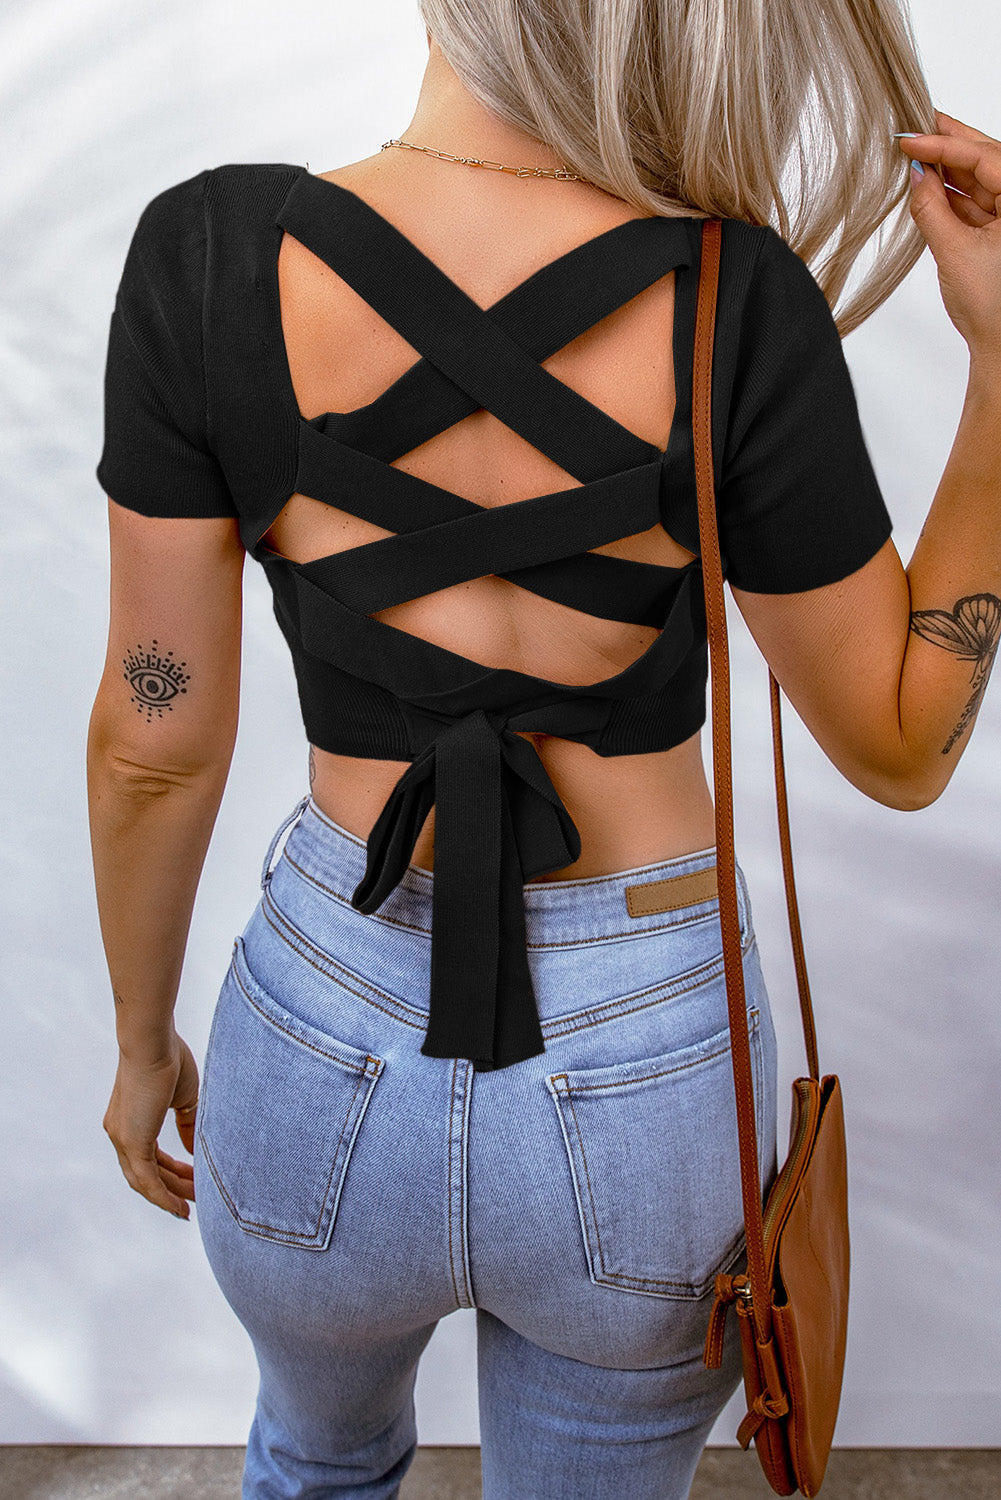 Lace-Up Square Neck Crop Top - Women’s Clothing & Accessories - Shirts & Tops - 17 - 2024